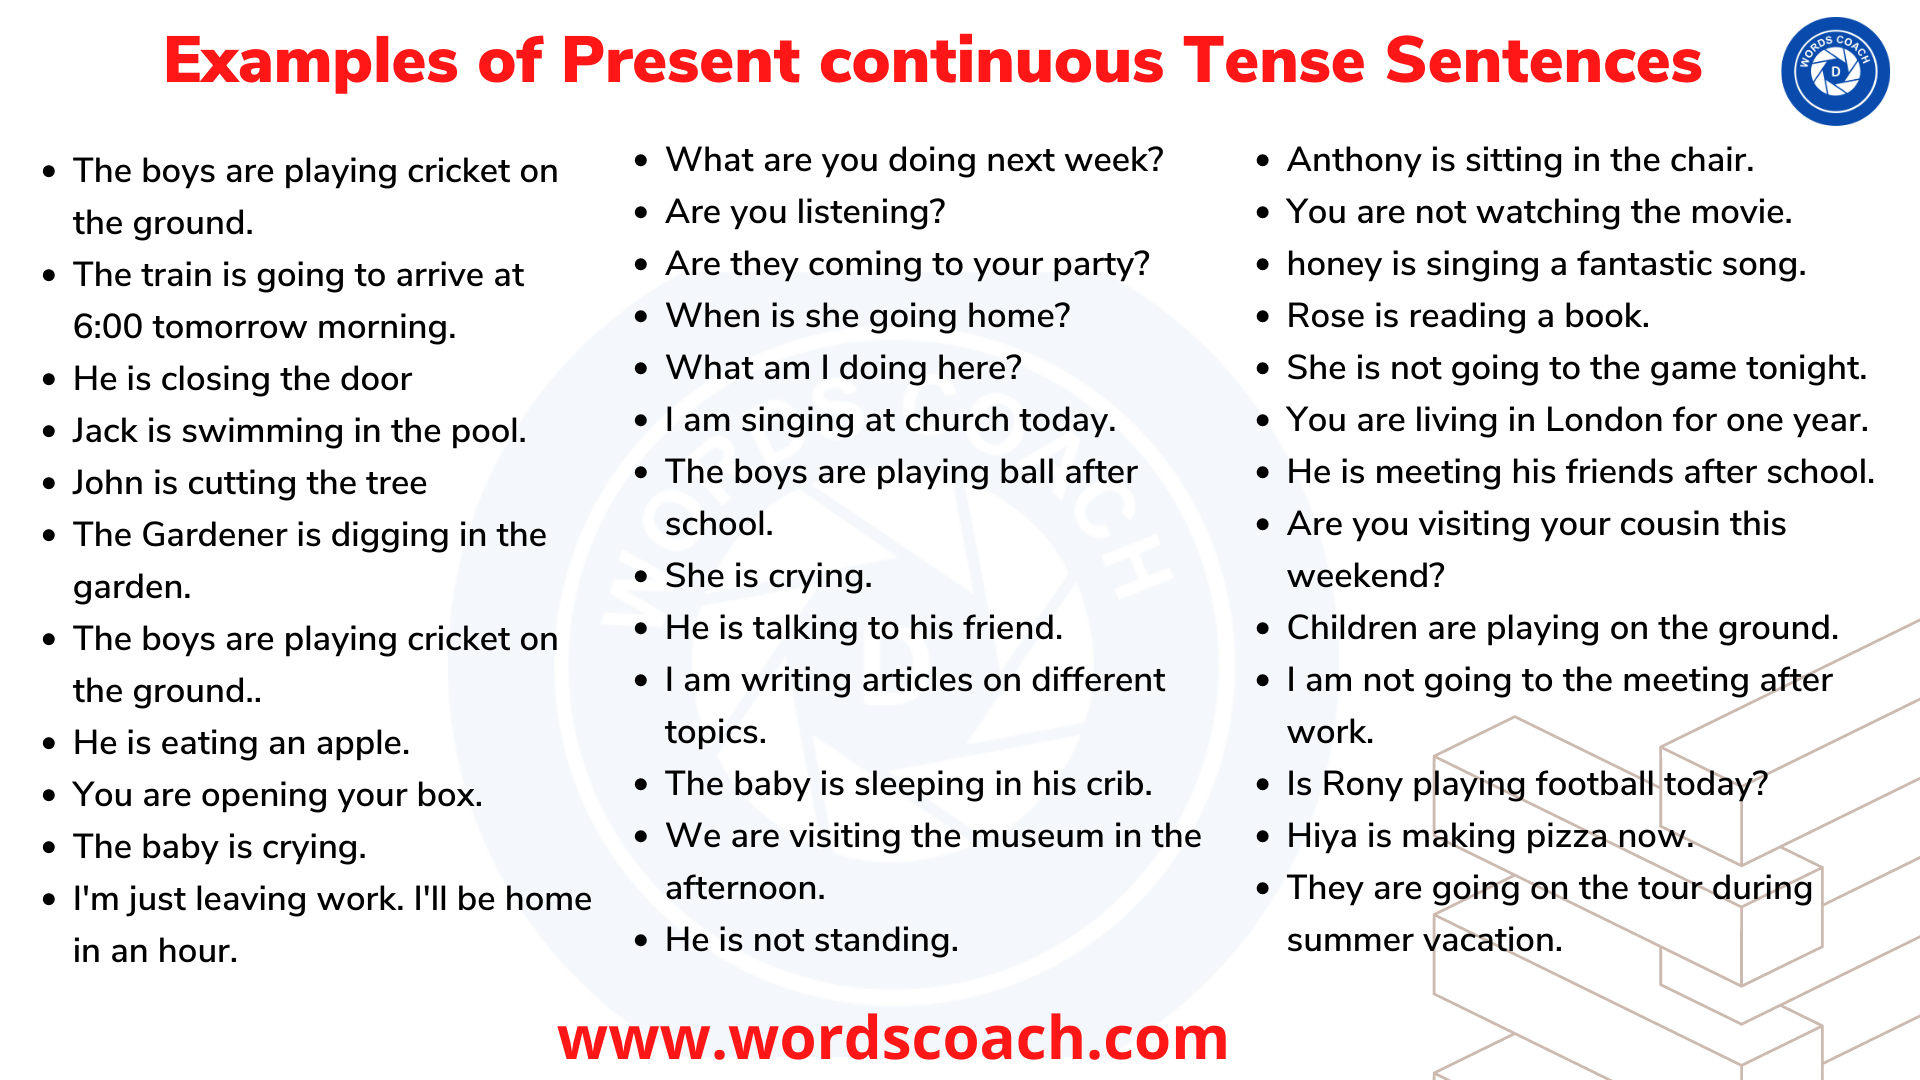 Examples of Present continuous Tense Sentences